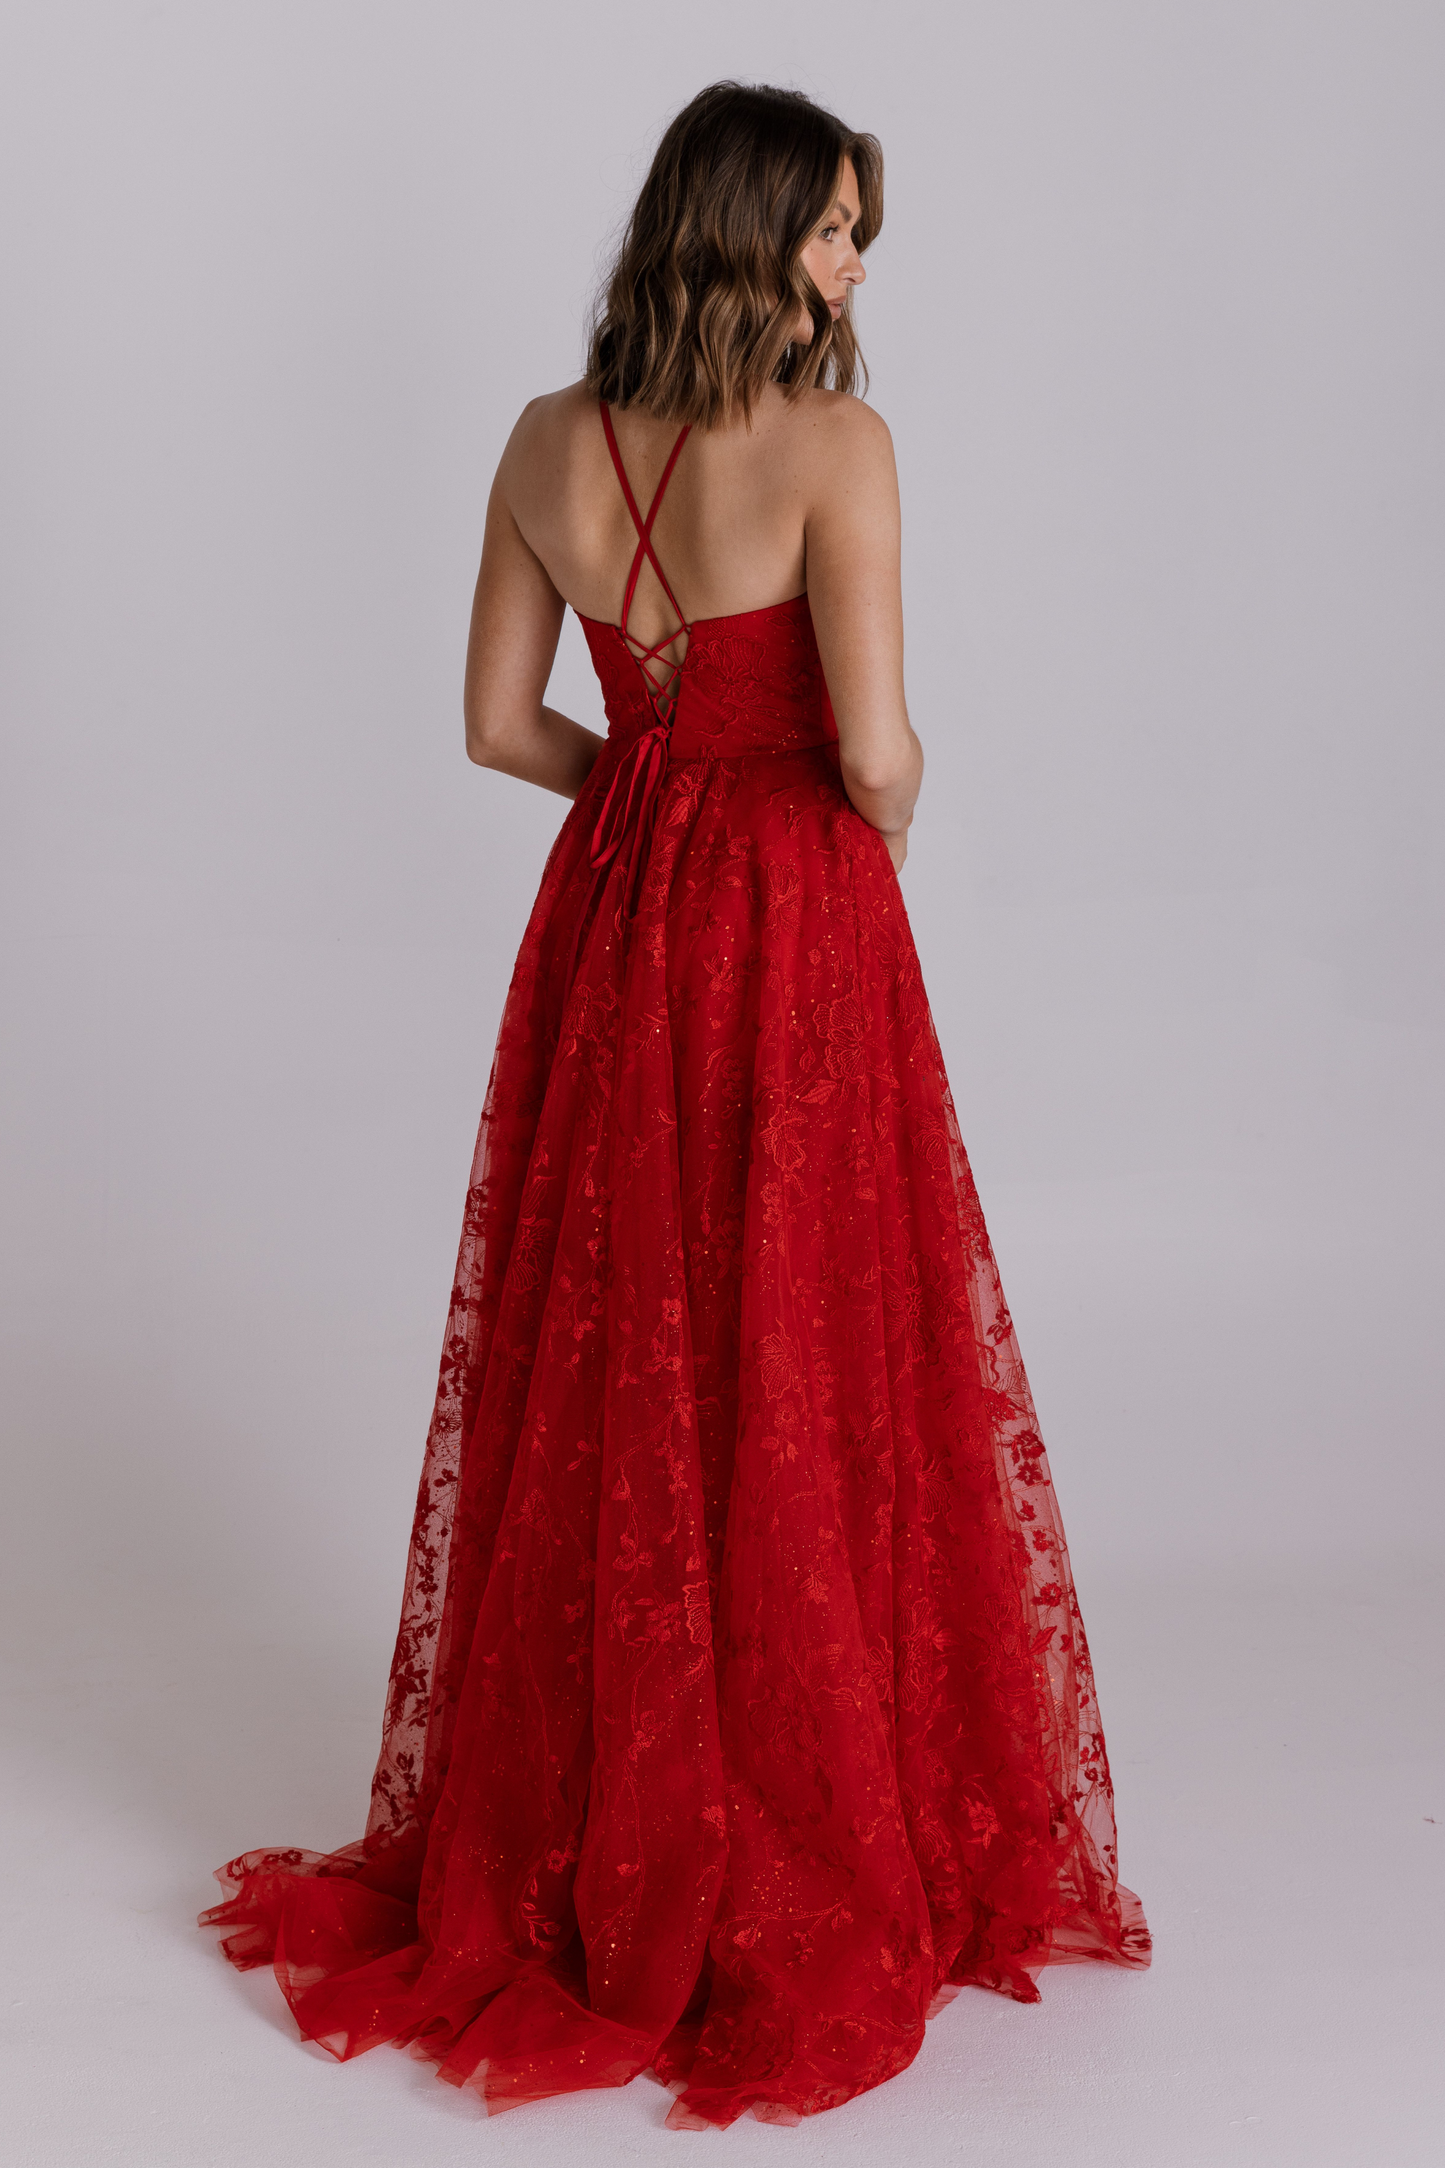 Tania Olsen a-line lace and glitter tulle formal dress in scarlet red